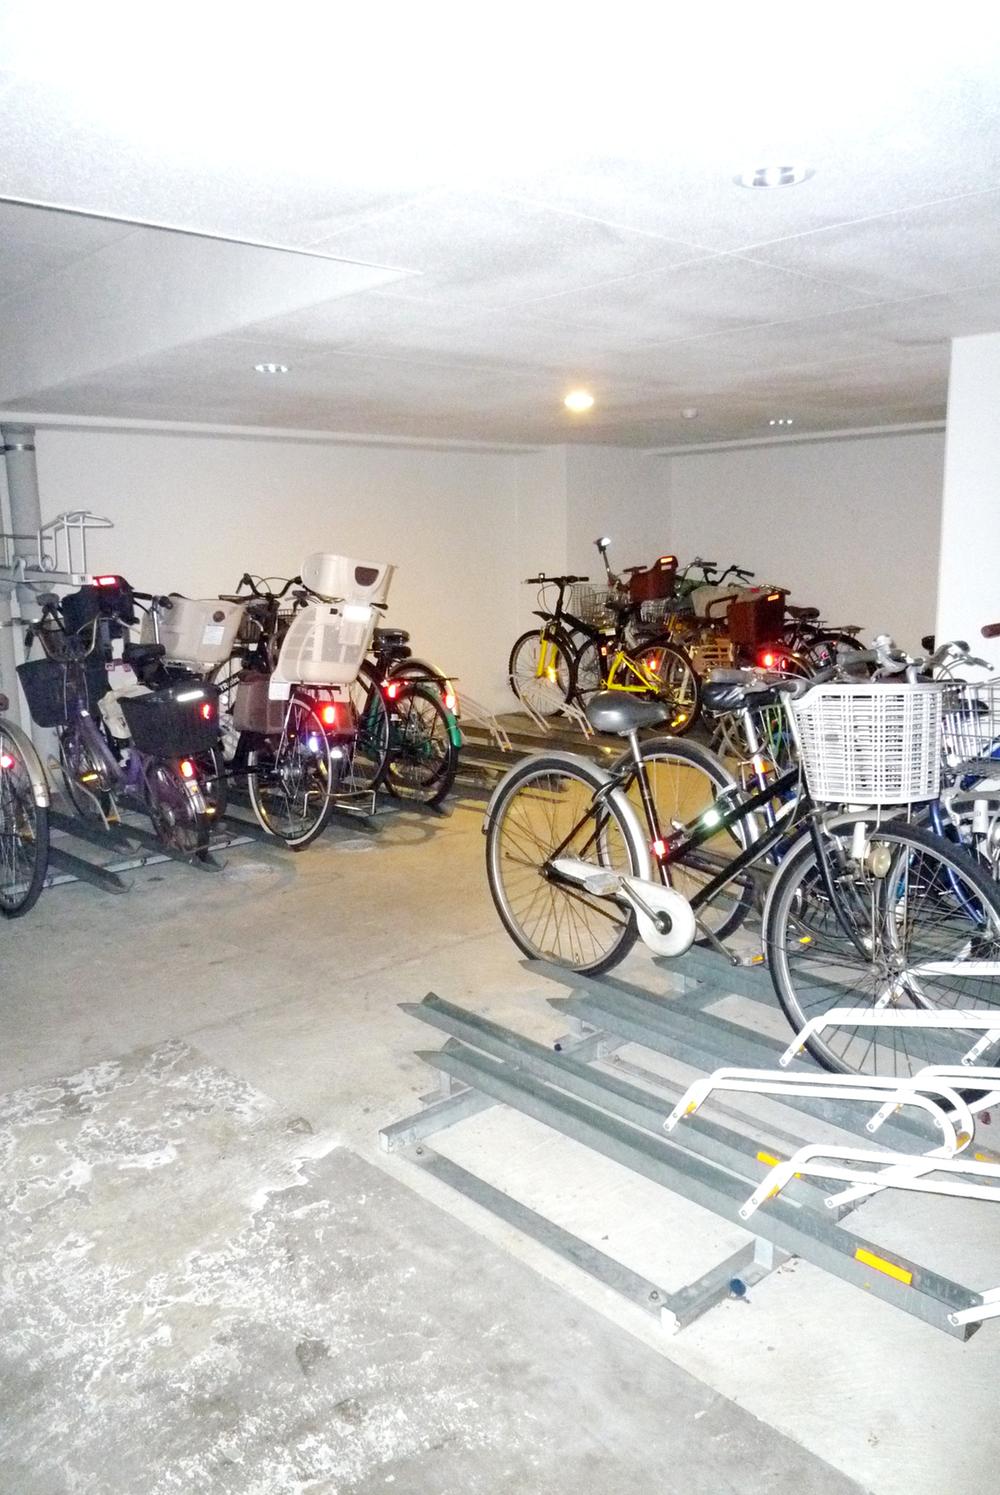 Other local. Bicycle-parking space